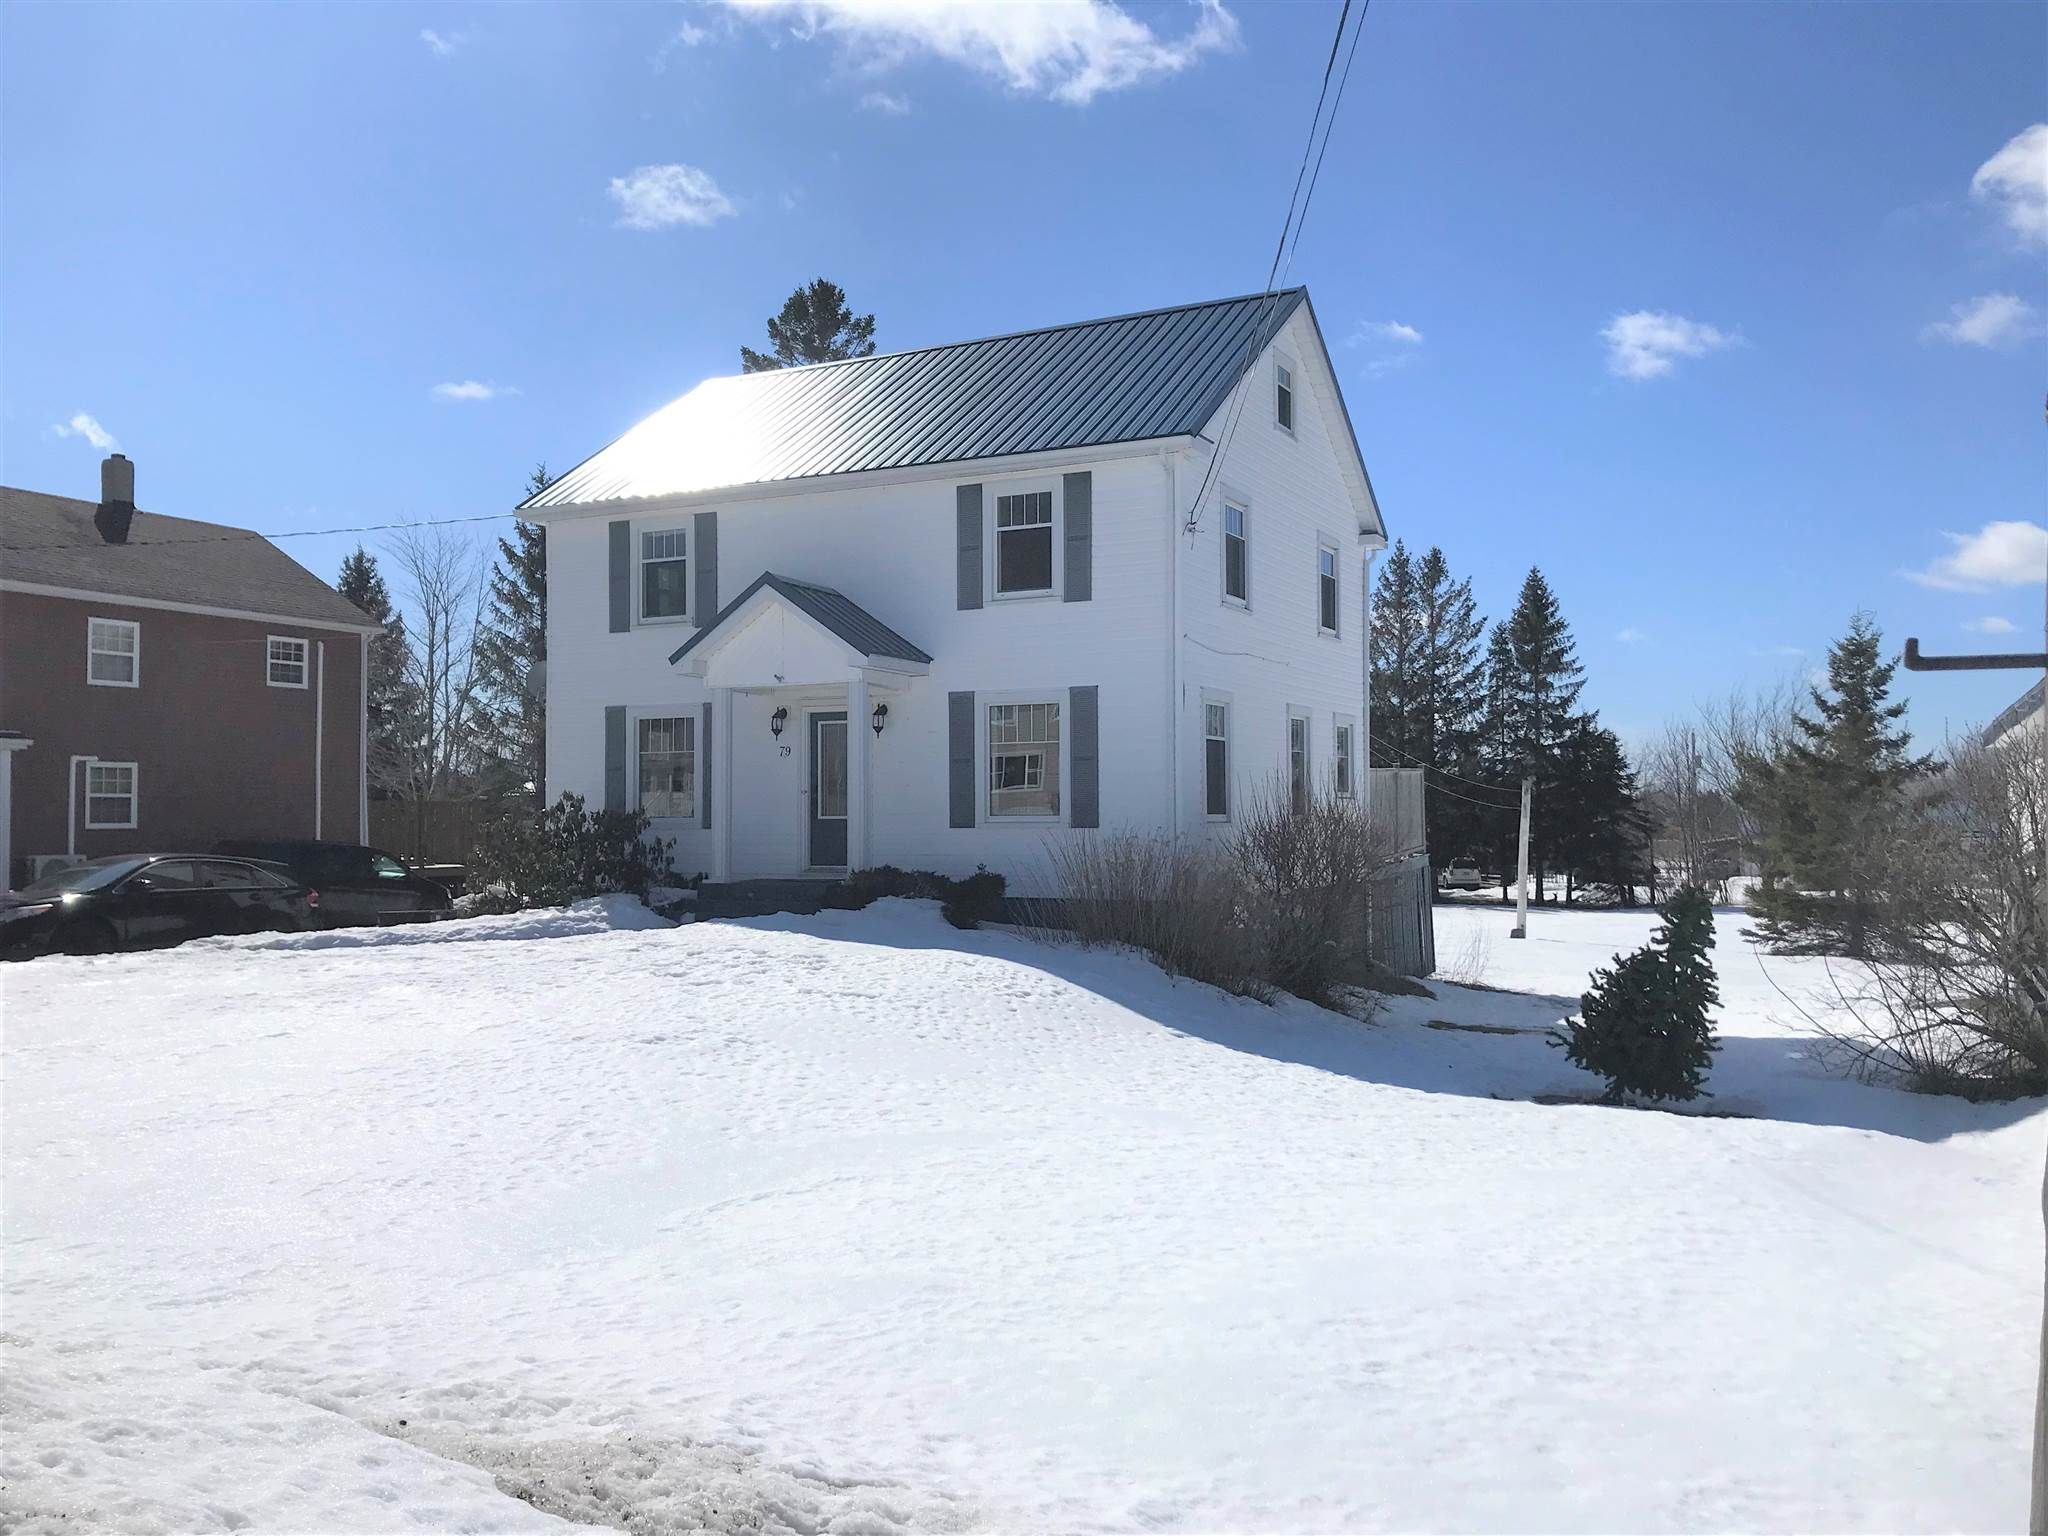 Main Photo: 79 McFarlane Street in Springhill: 102S-South Of Hwy 104, Parrsboro and area Residential for sale (Northern Region)  : MLS®# 202105109